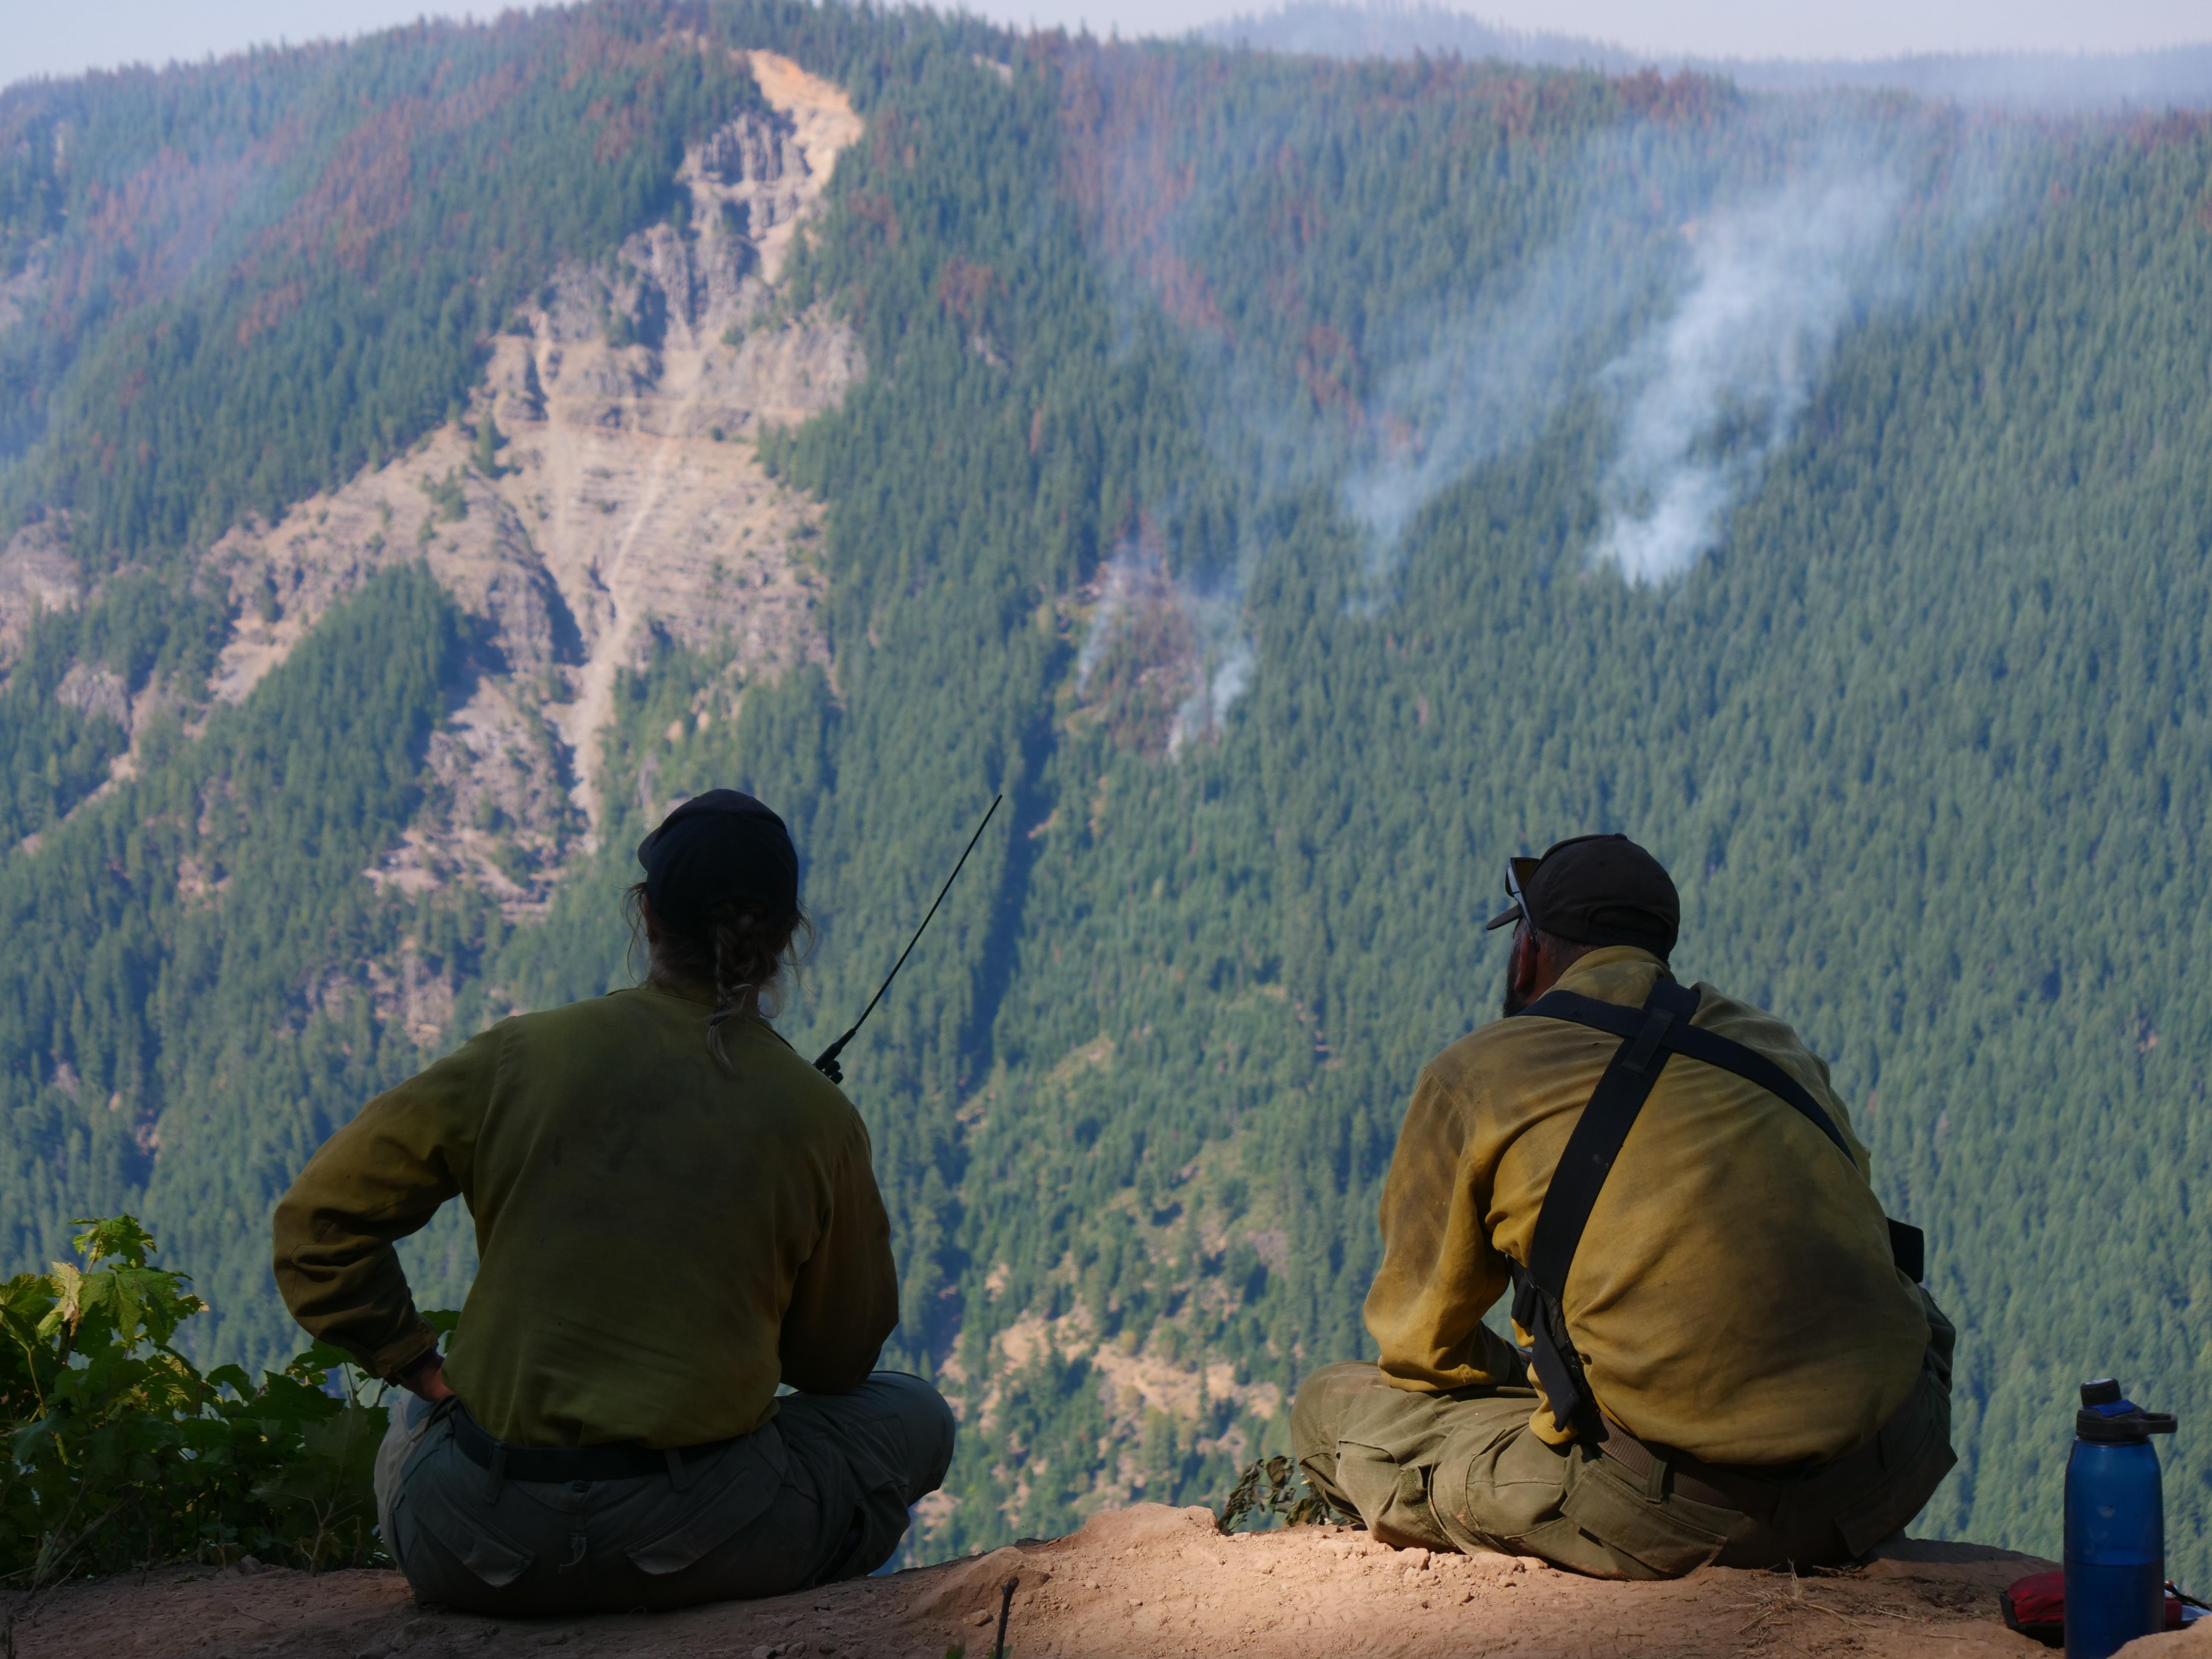 Two firefighters, one holding a radio, are seen sitting on a ridge across from a smoking hillside.